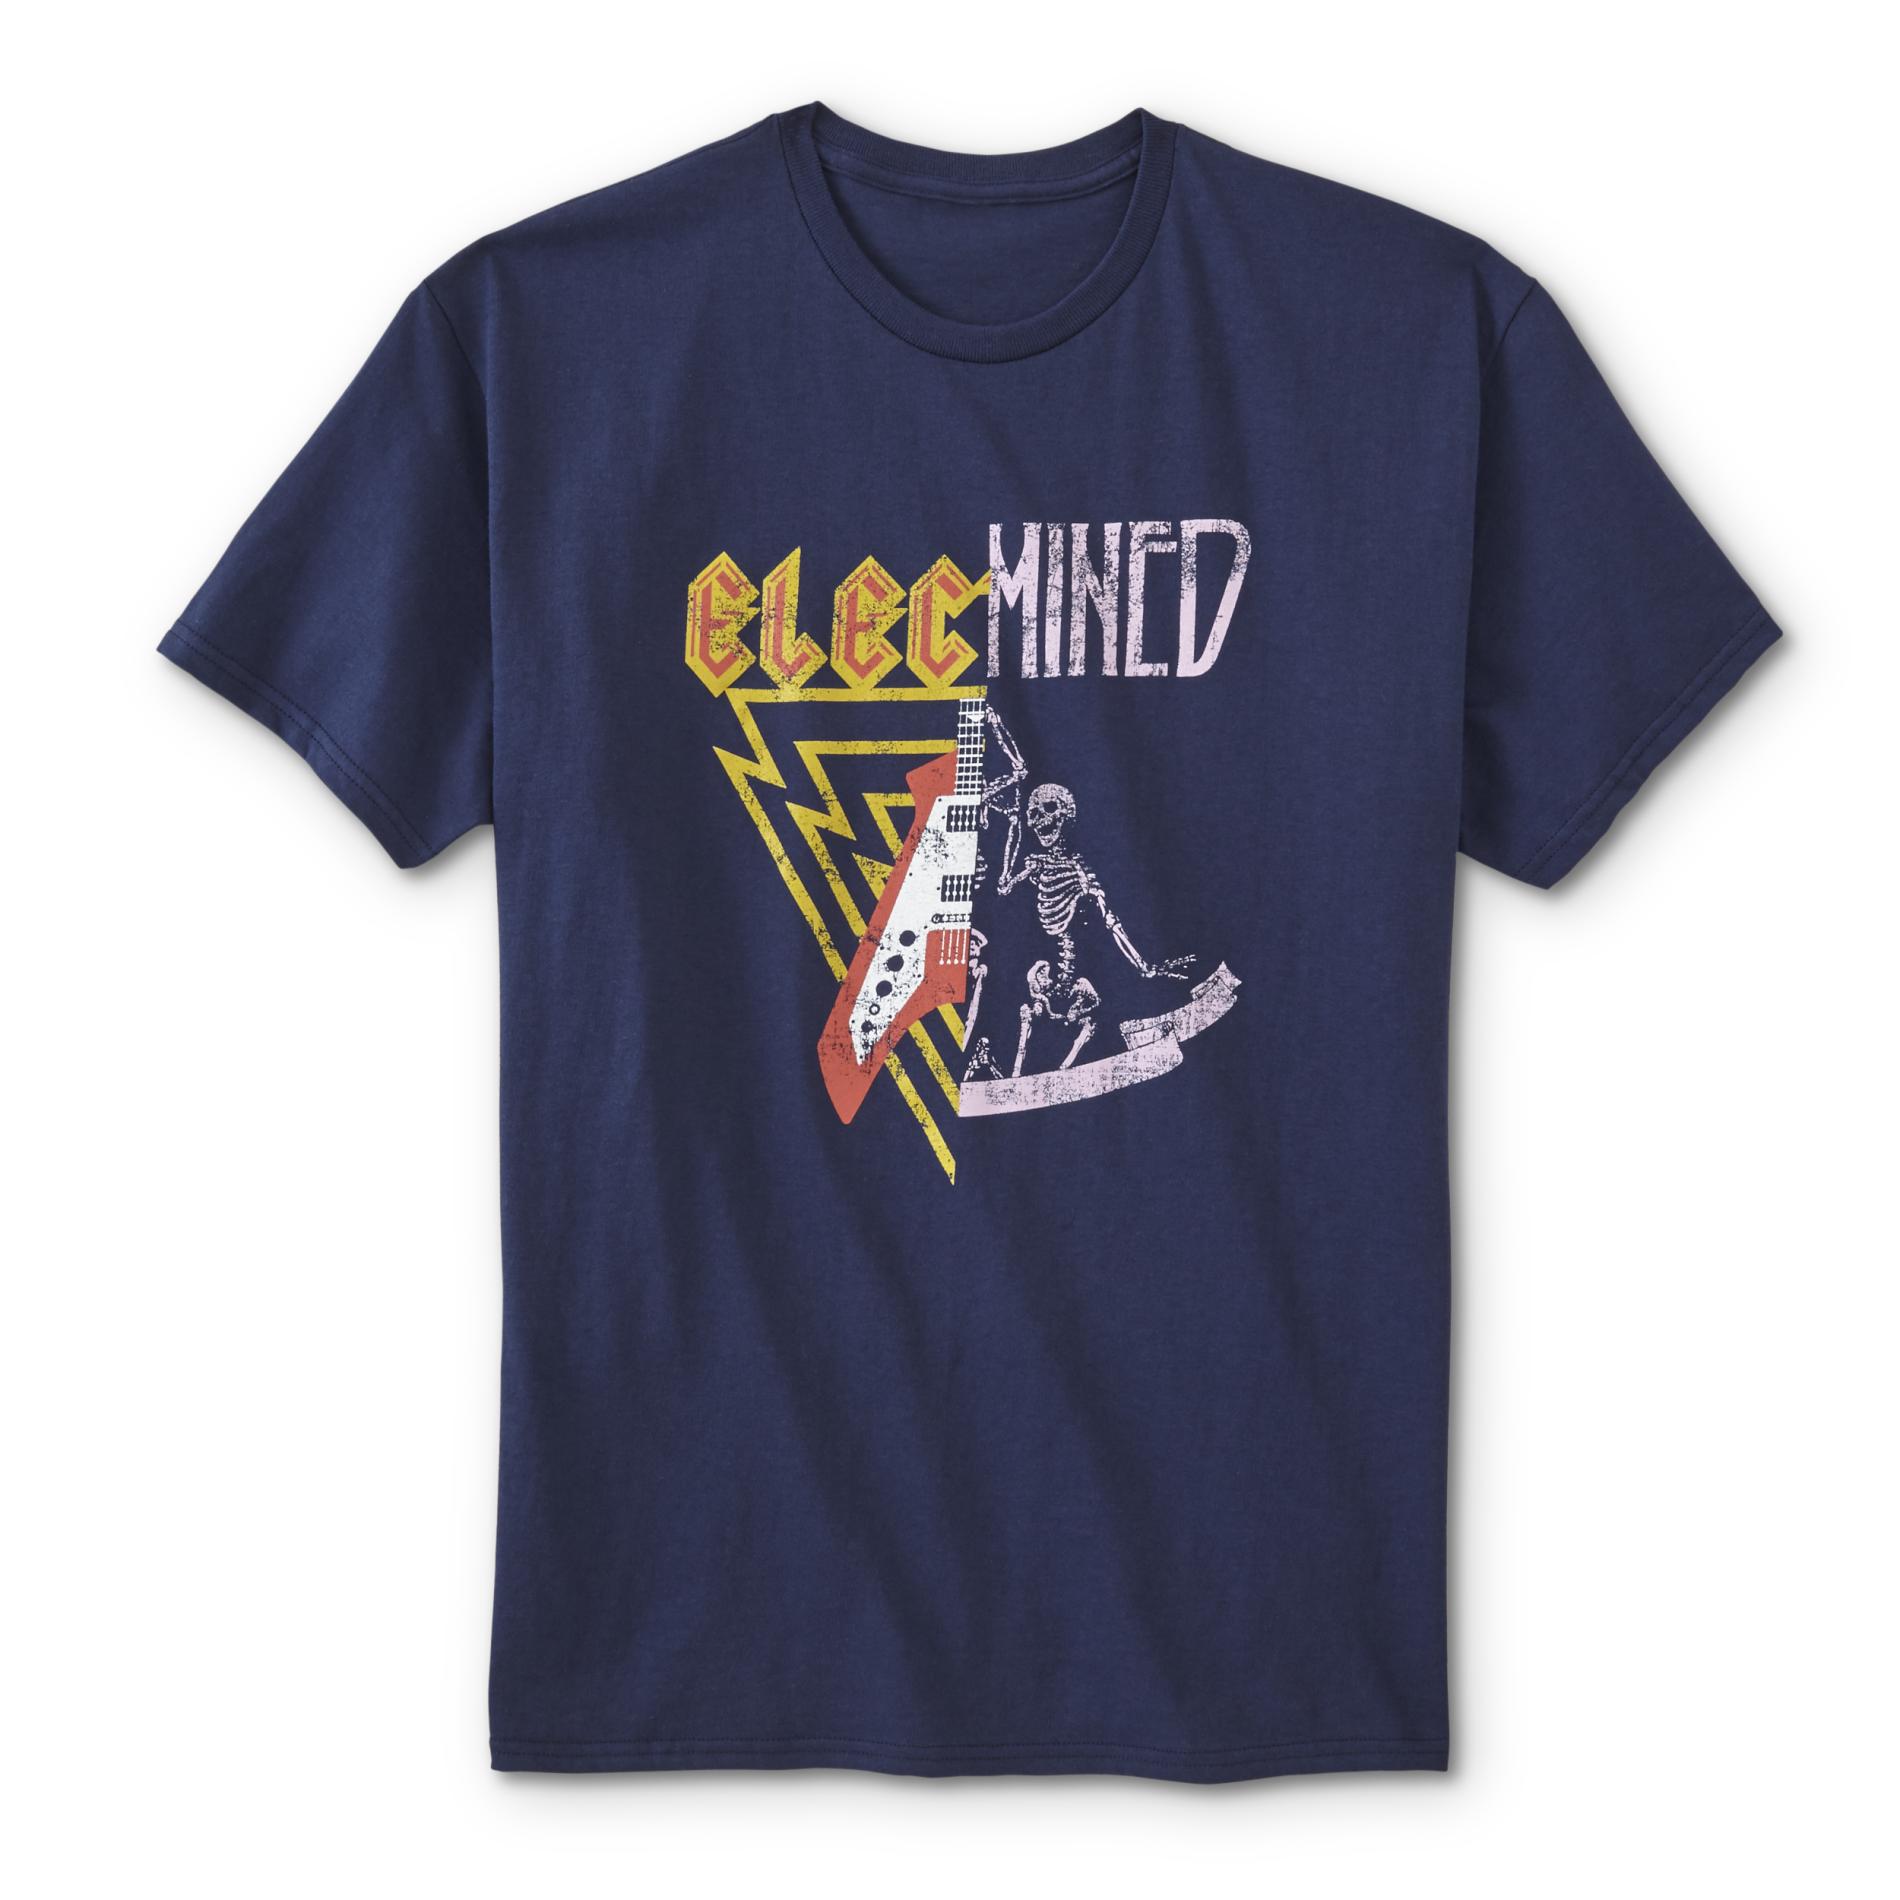 Young Men's Graphic T-Shirt - Elecmined